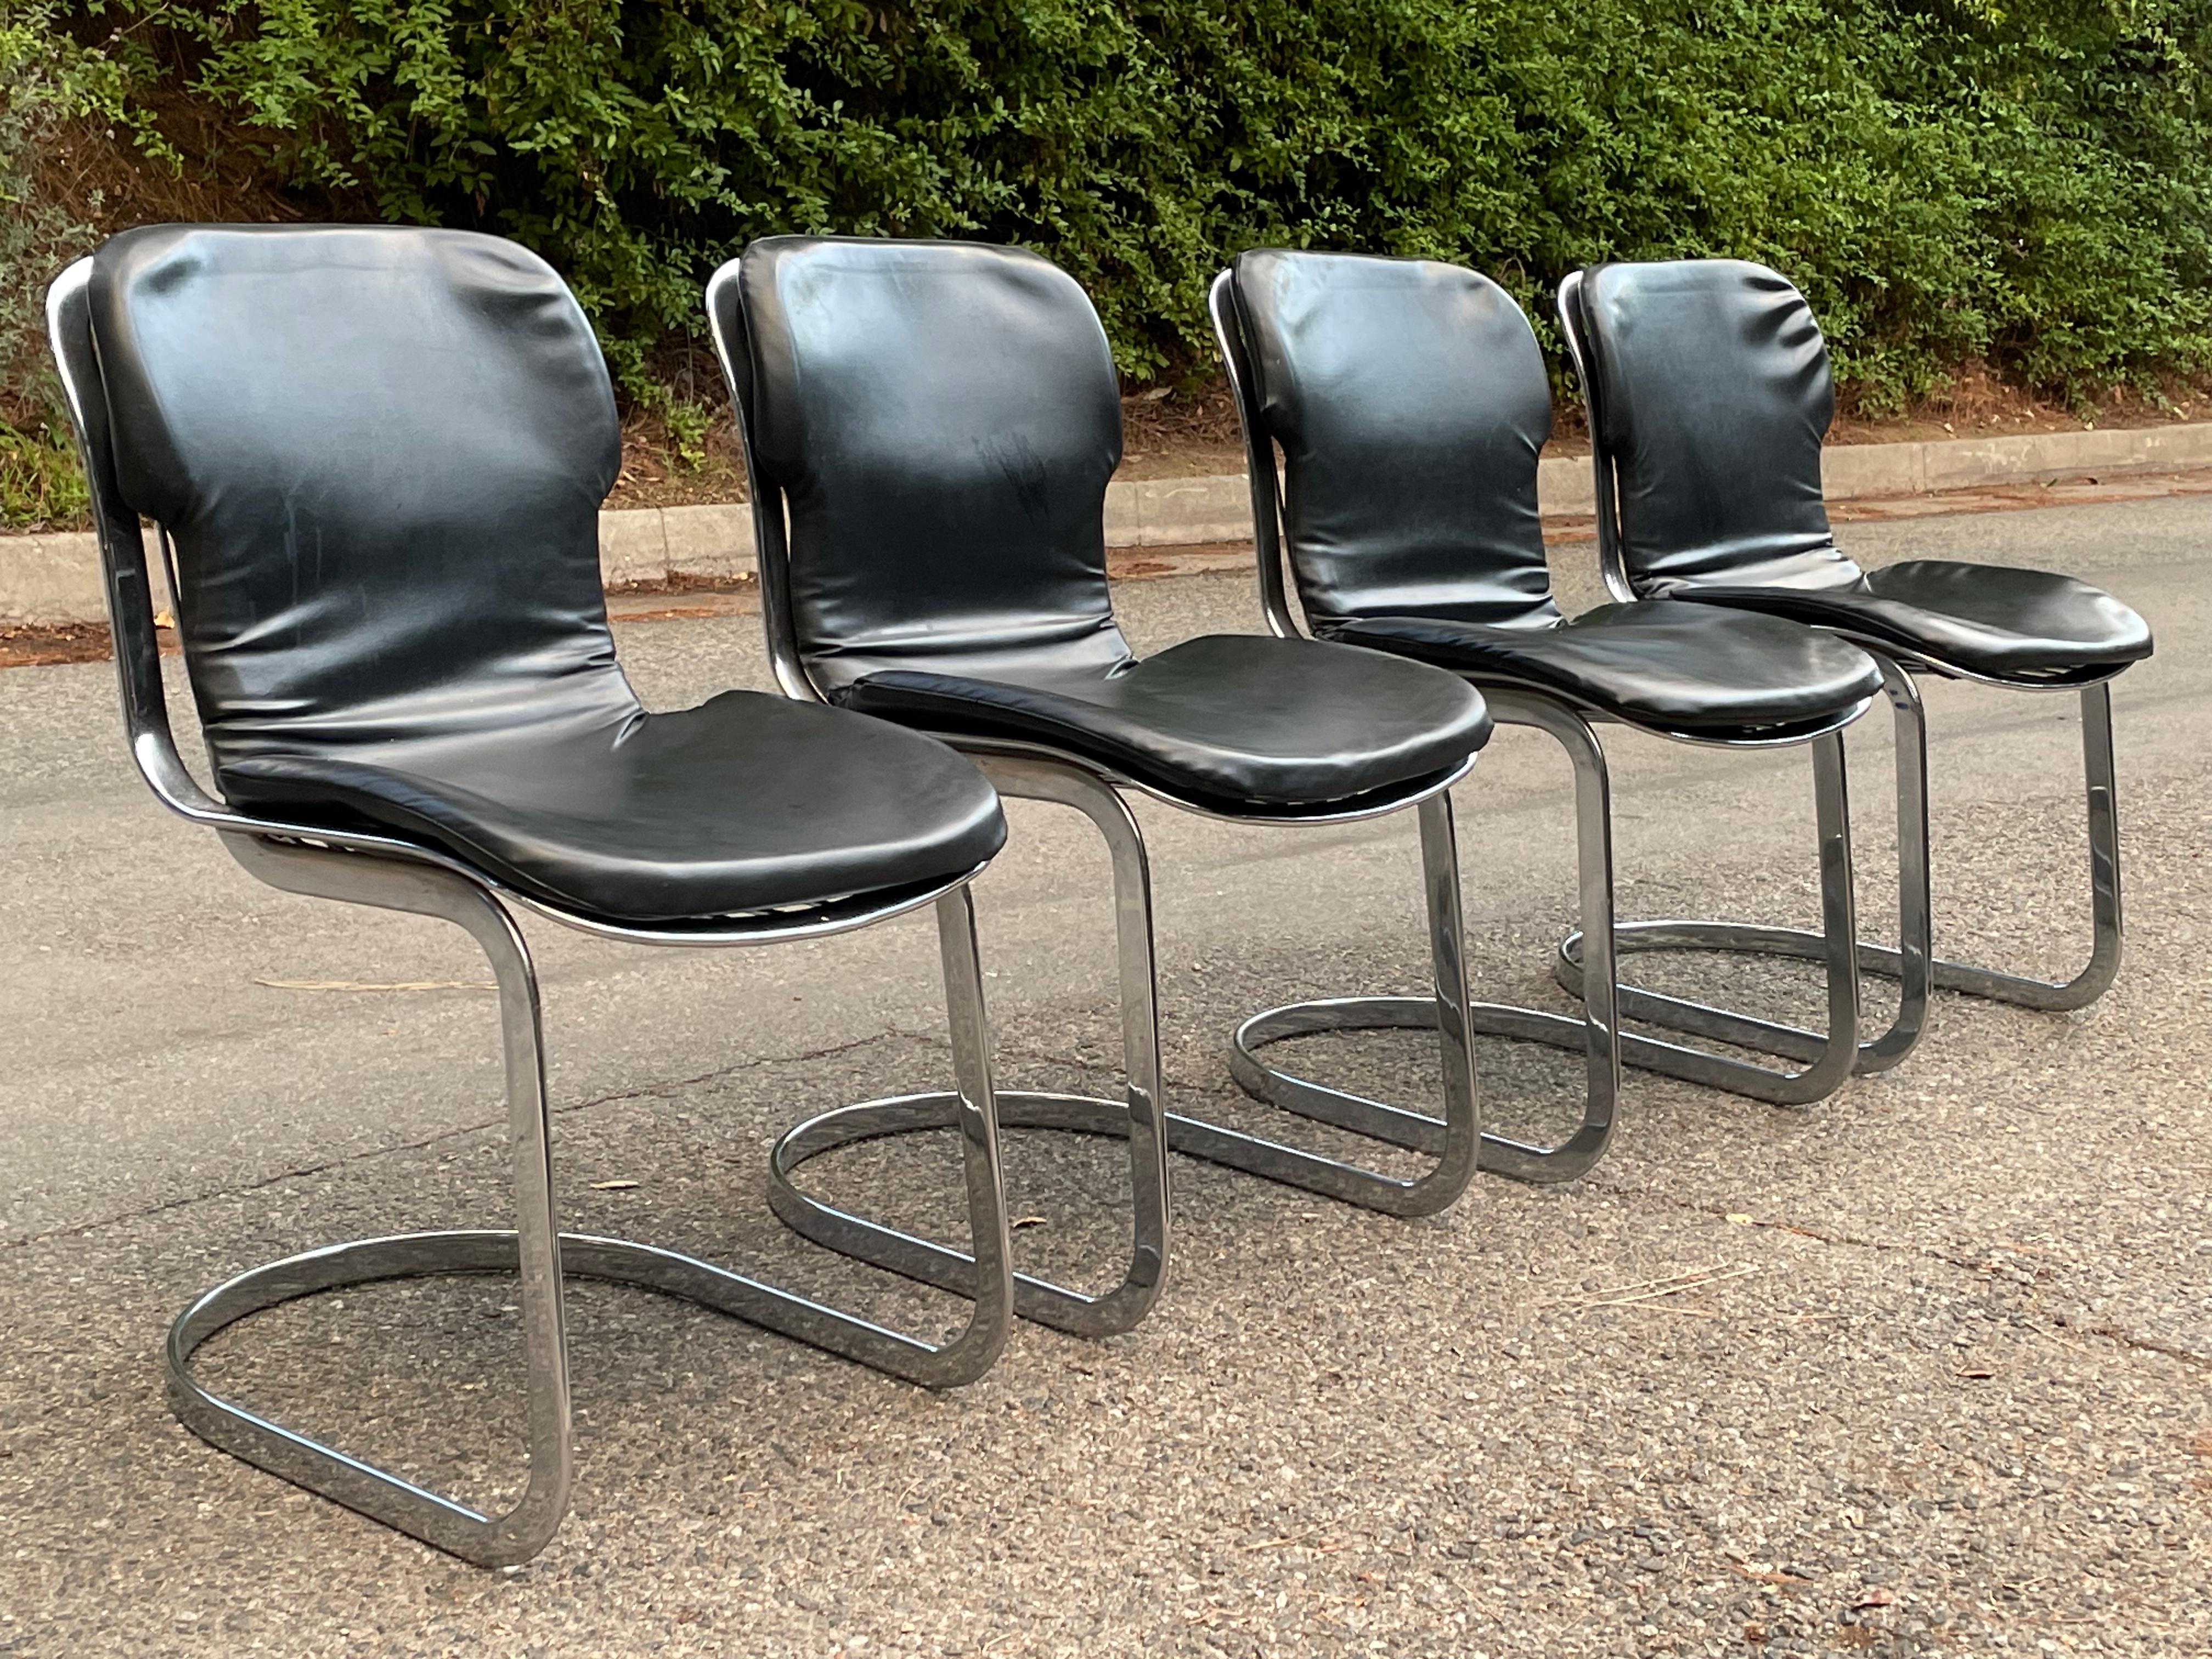 Set of (4) Vintage Mid Century 70's Willy Rizzo Chrome Dining Chairs for Cidue Elementi D’Arredo-Carre.

Designed by Willy Rizzo.
Made in Italy.
Chrome frame and black faux leather seat cushions.
In very good vintage condition. Chairs are SIGNED